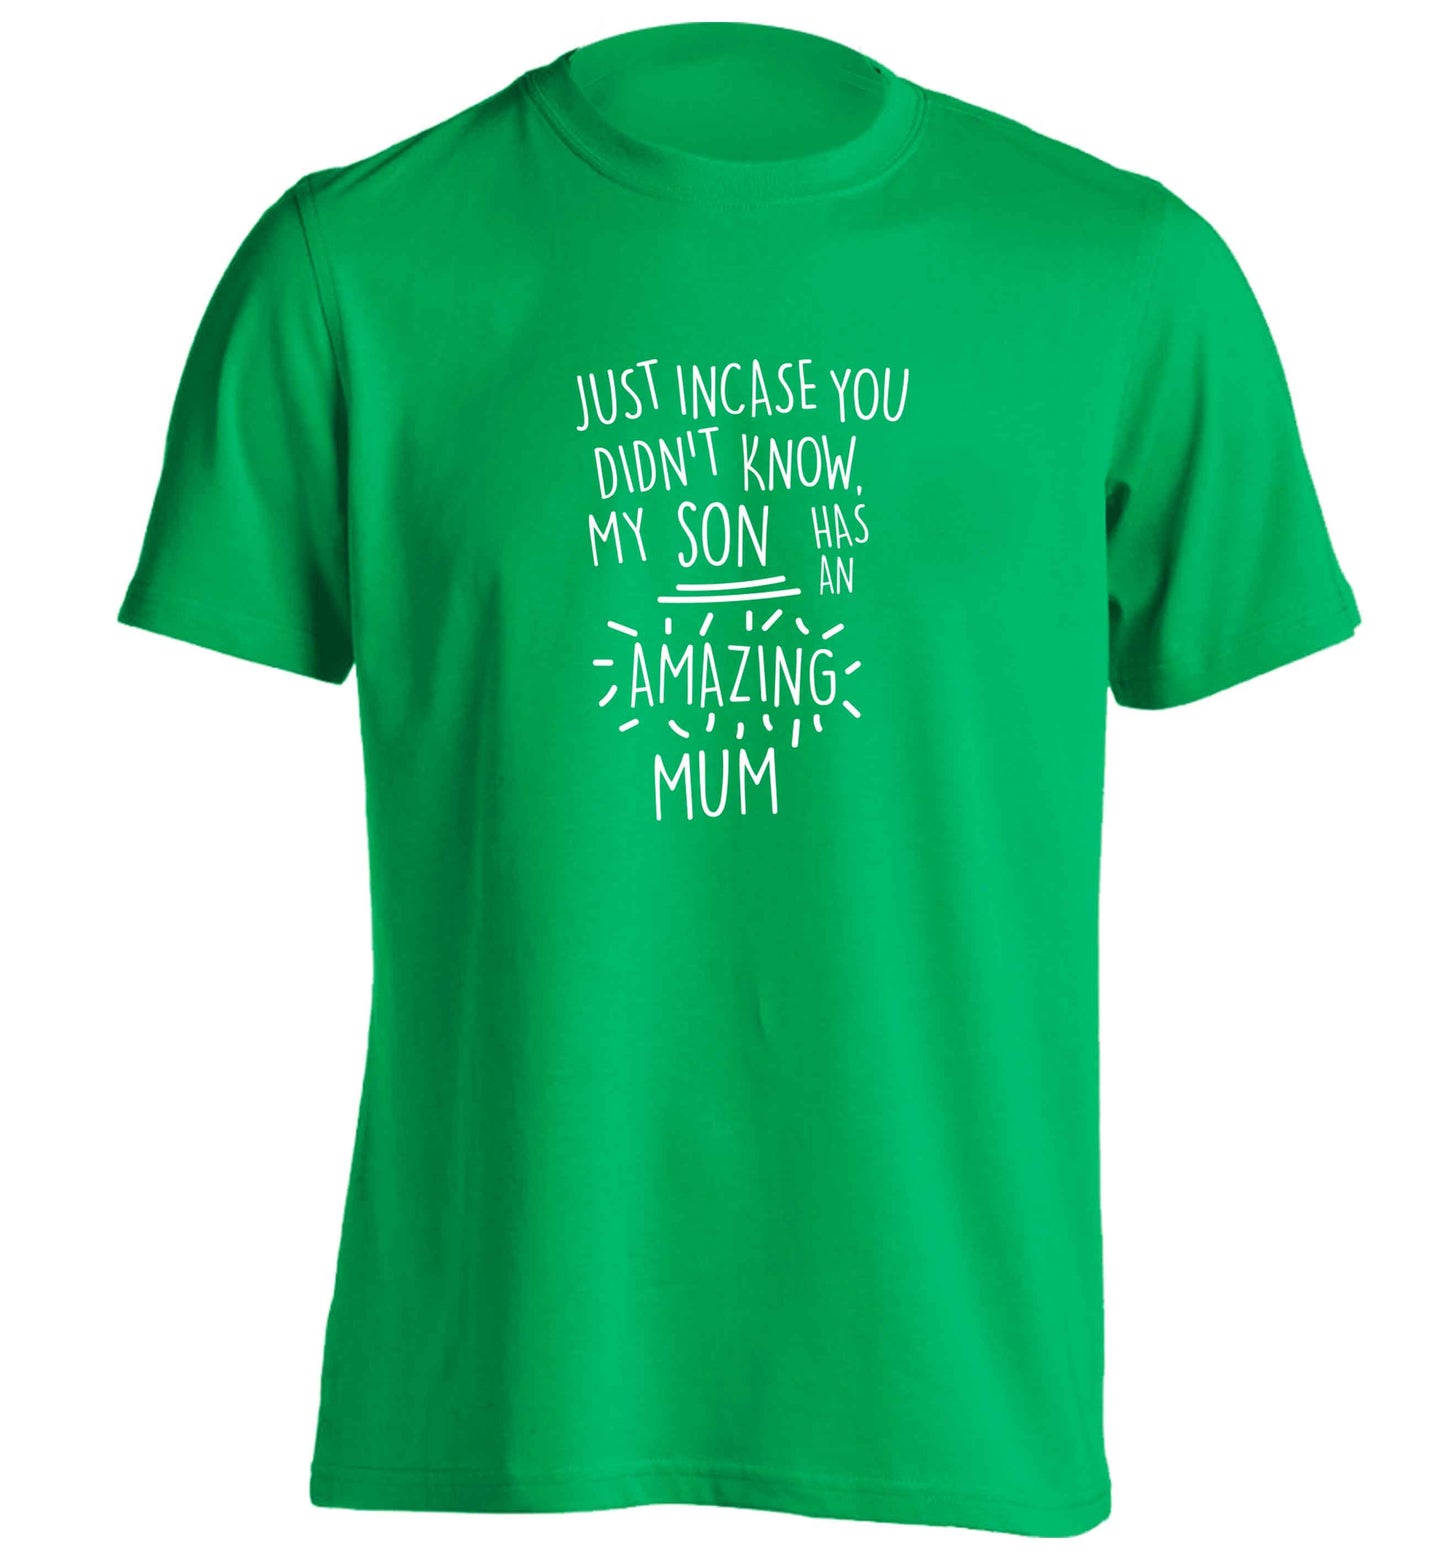 Just incase you didn't know my son has an amazing mum adults unisex green Tshirt 2XL